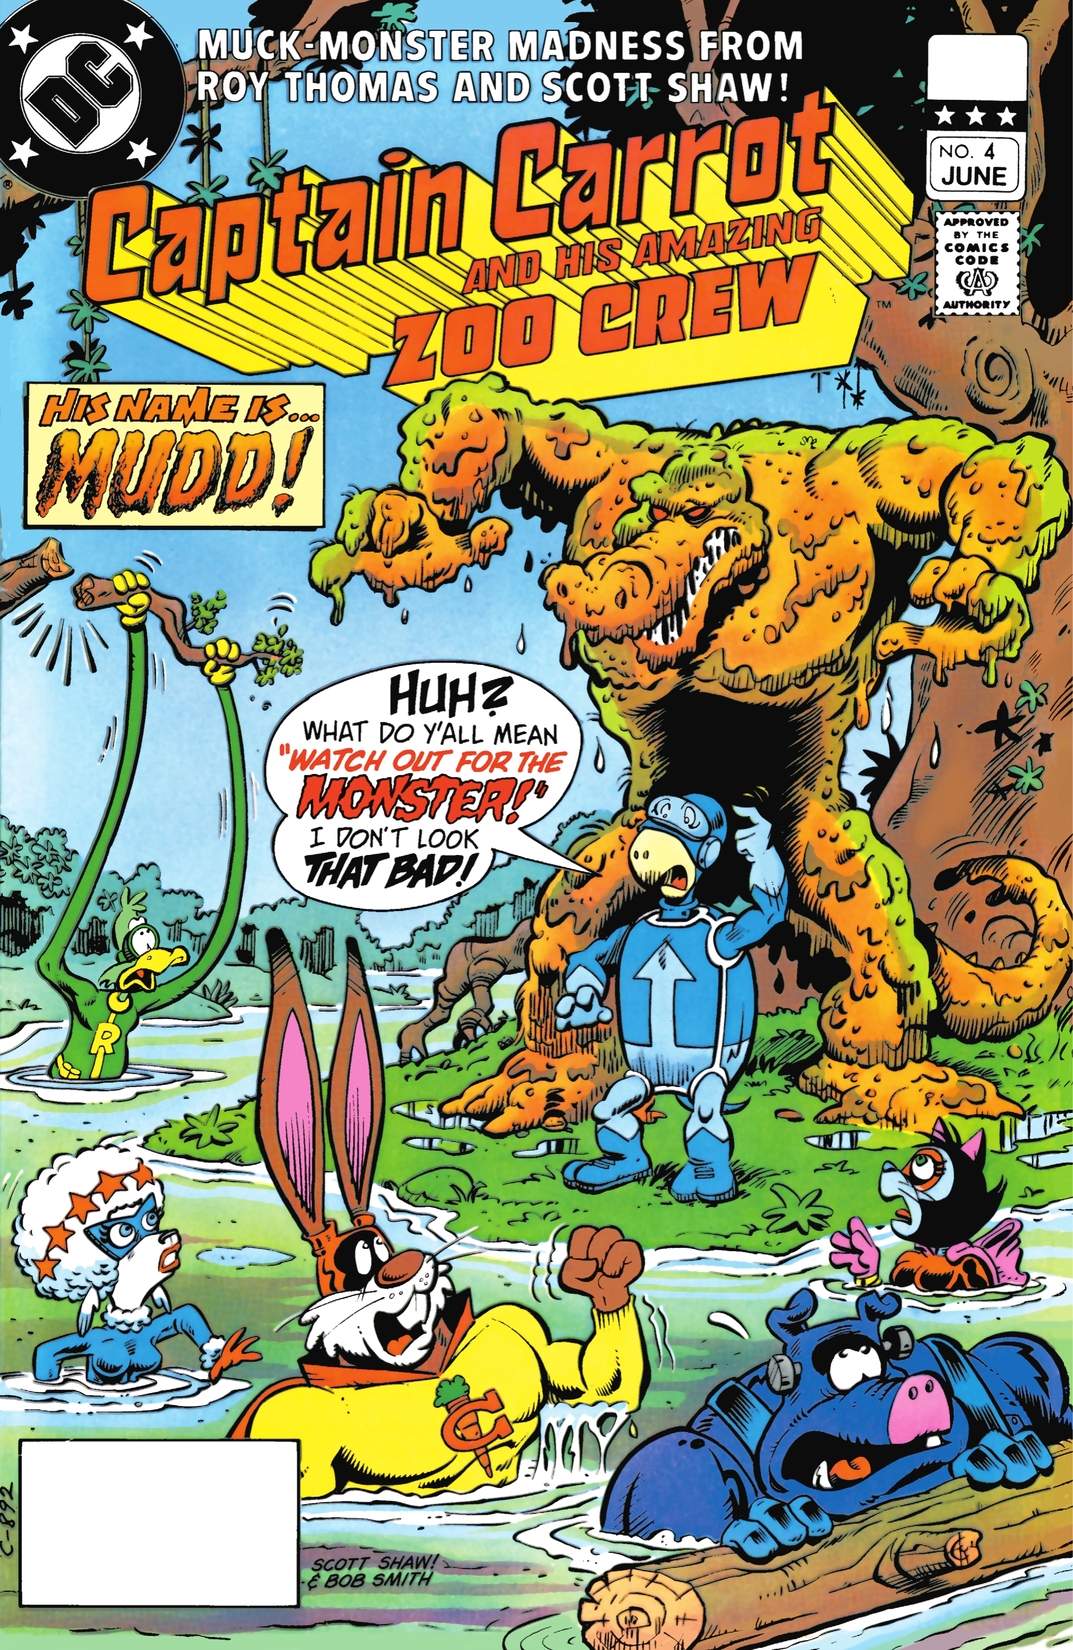 Captain Carrot and His Amazing Zoo Crew #4 preview images